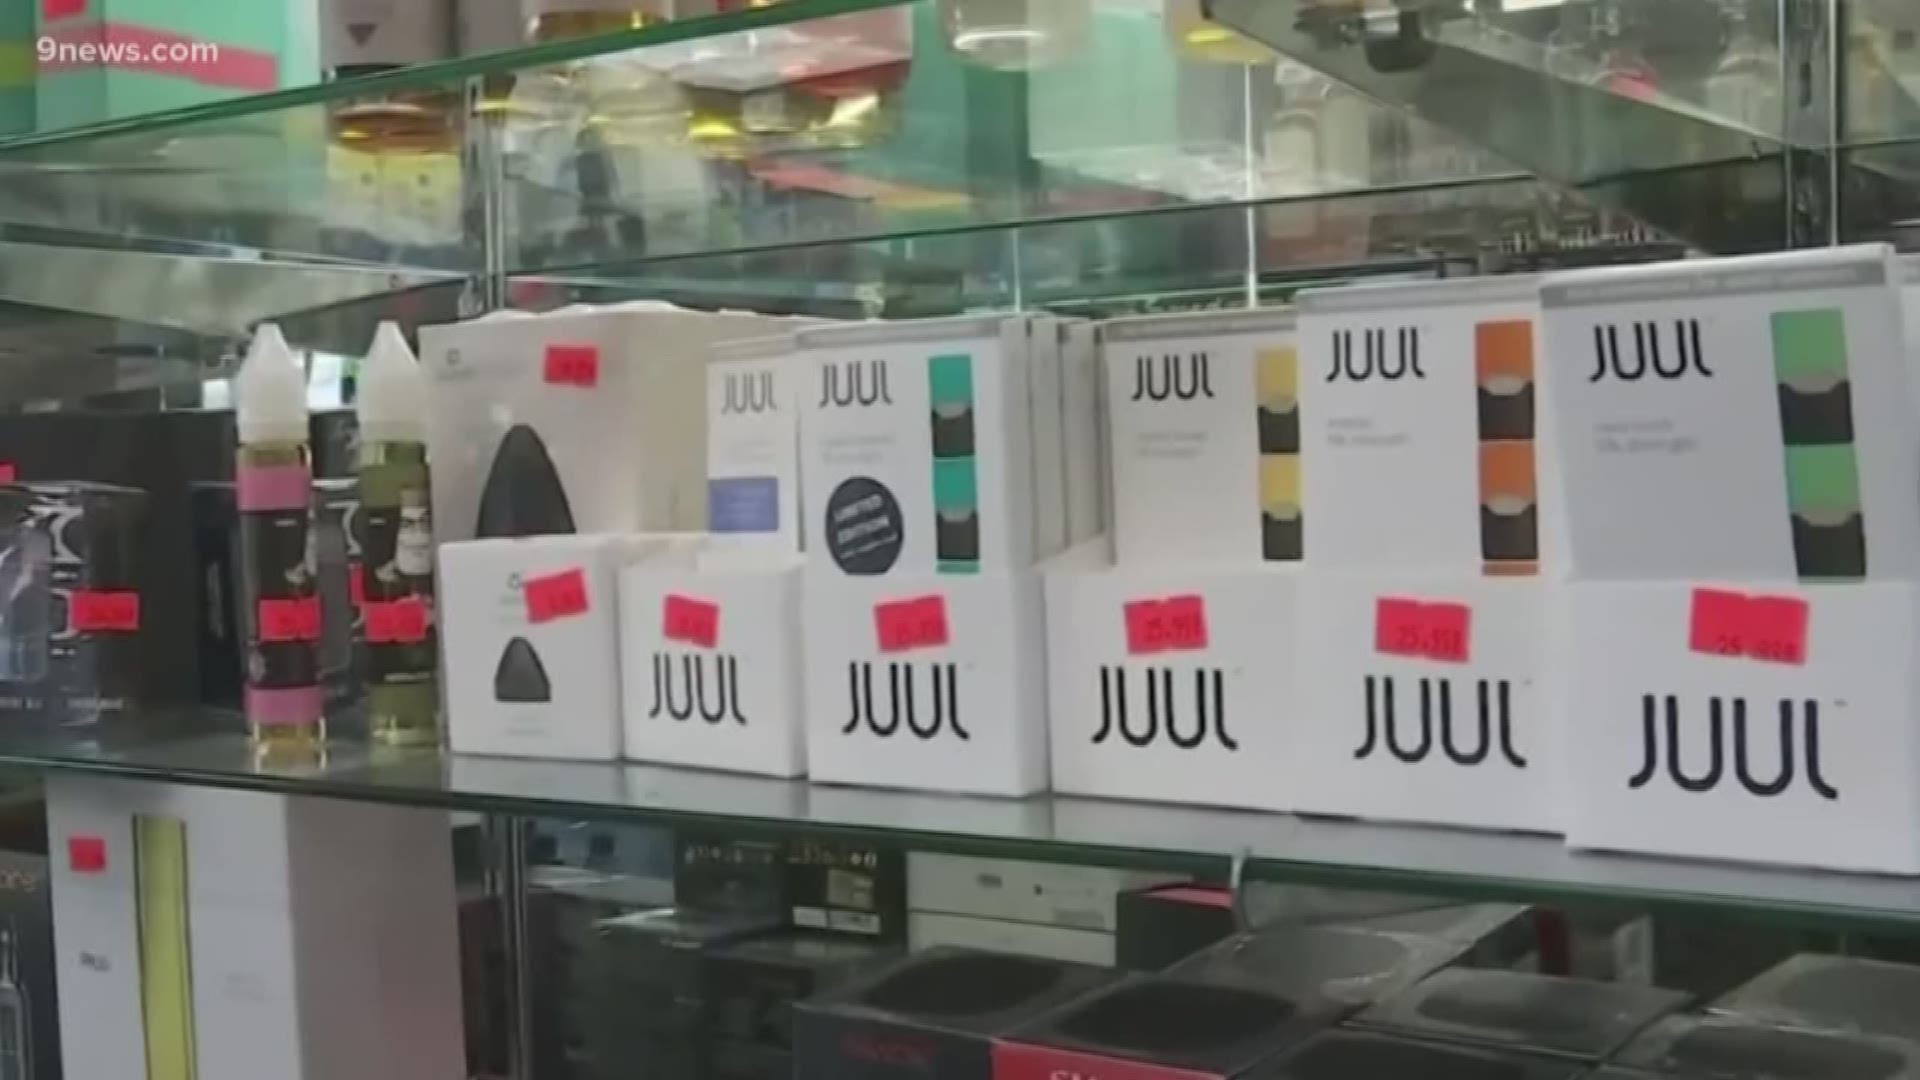 A Juul executive acknowledged past missteps, but said their focus is on getting adults to quit cigarettes.